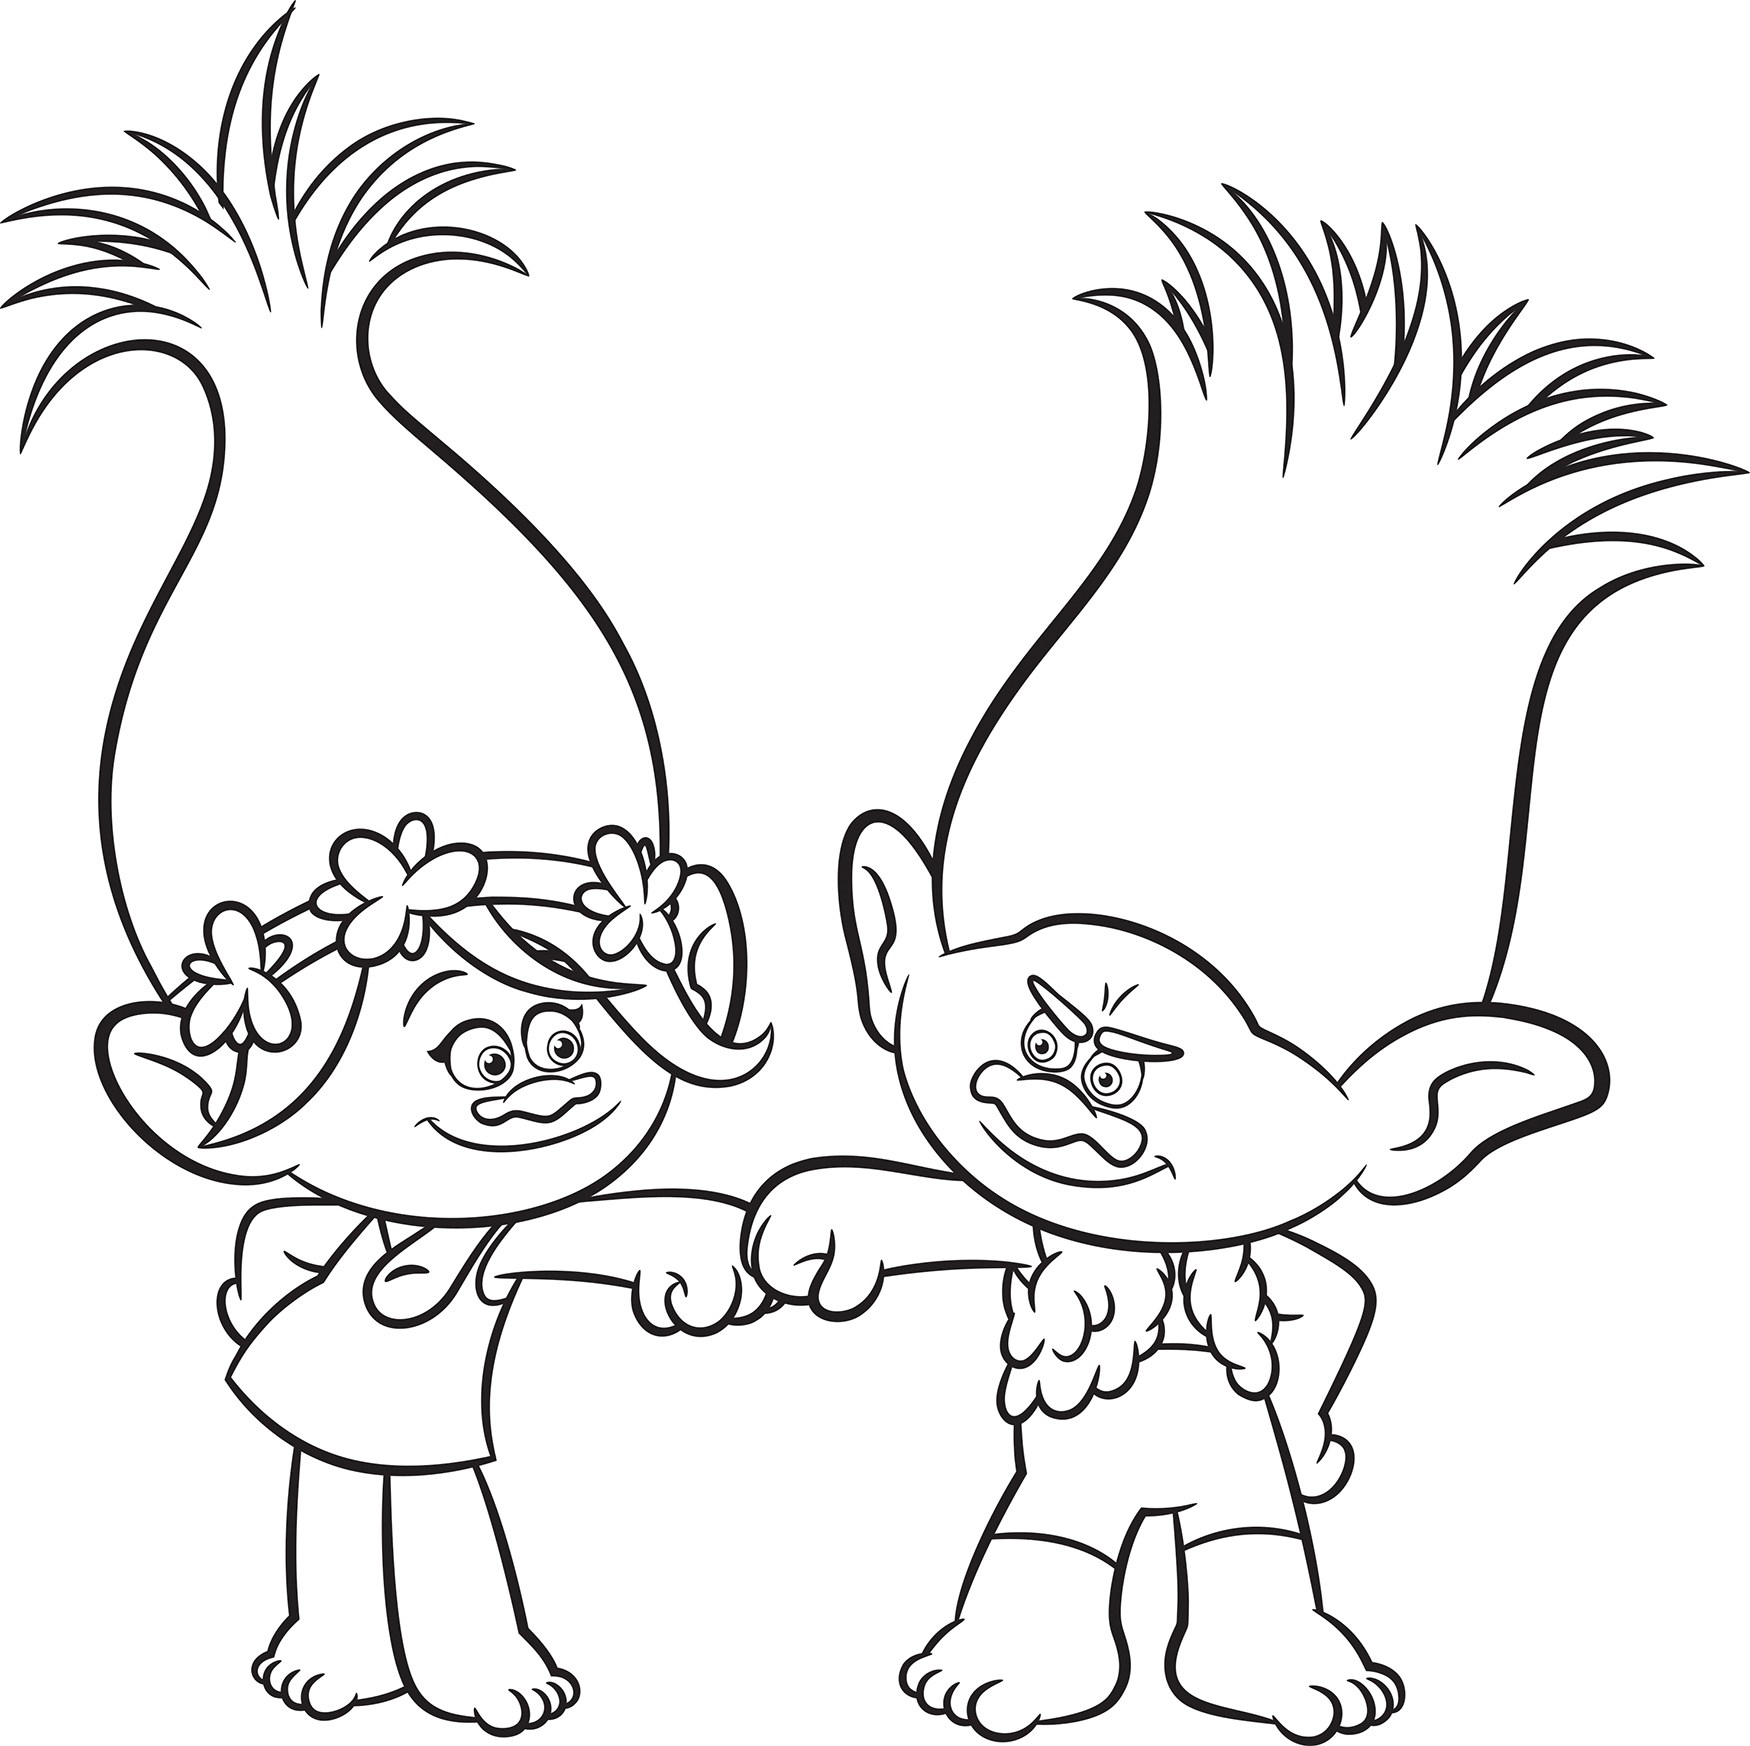 Trolls Movie Coloring Pages Best Coloring Pages For Kids Effy Moom Free Coloring Picture wallpaper give a chance to color on the wall without getting in trouble! Fill the walls of your home or office with stress-relieving [effymoom.blogspot.com]